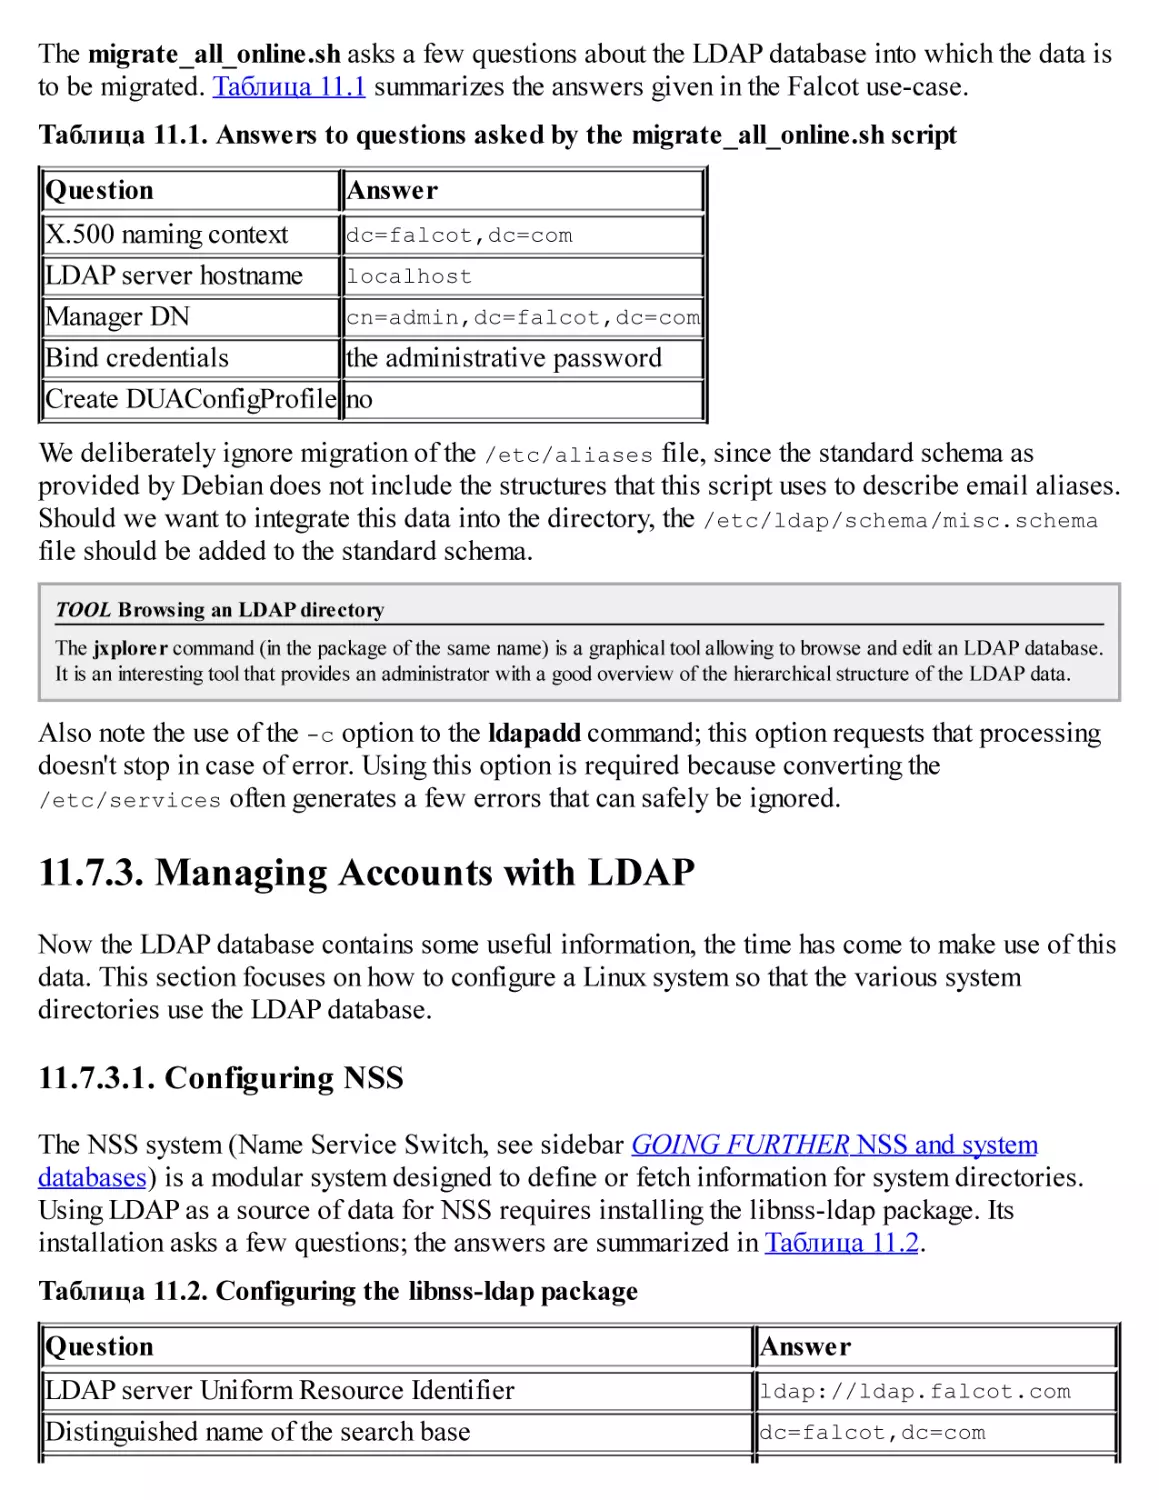 11.7.3. Managing Accounts with LDAP
11.7.3.1. Configuring NSS